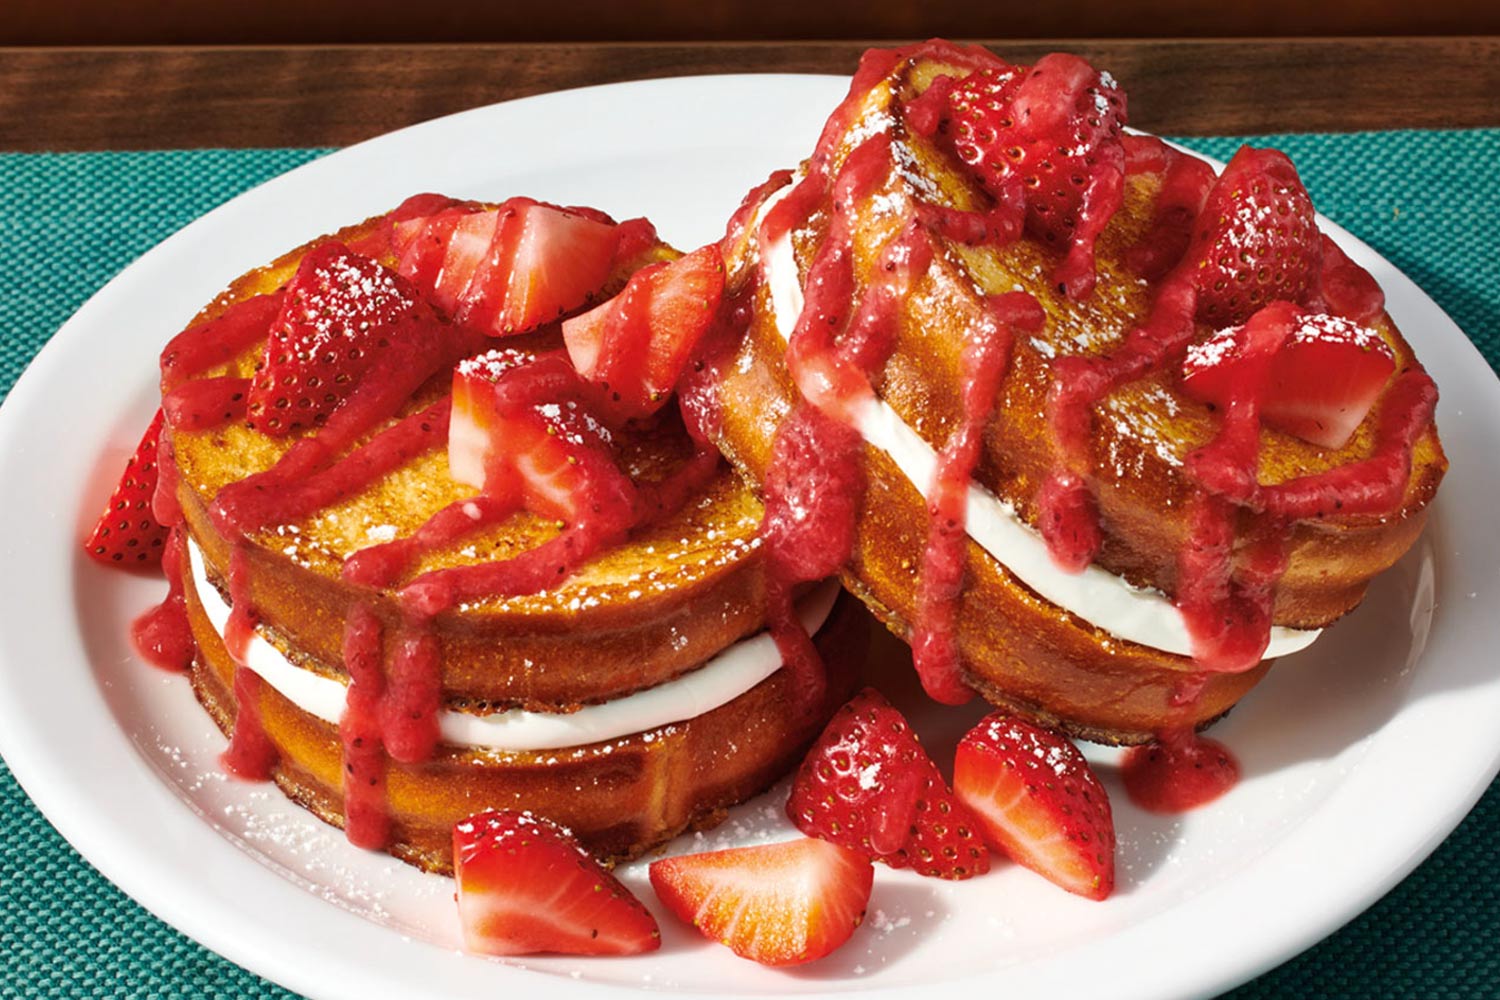 Plate of french toast with filling and strawberries